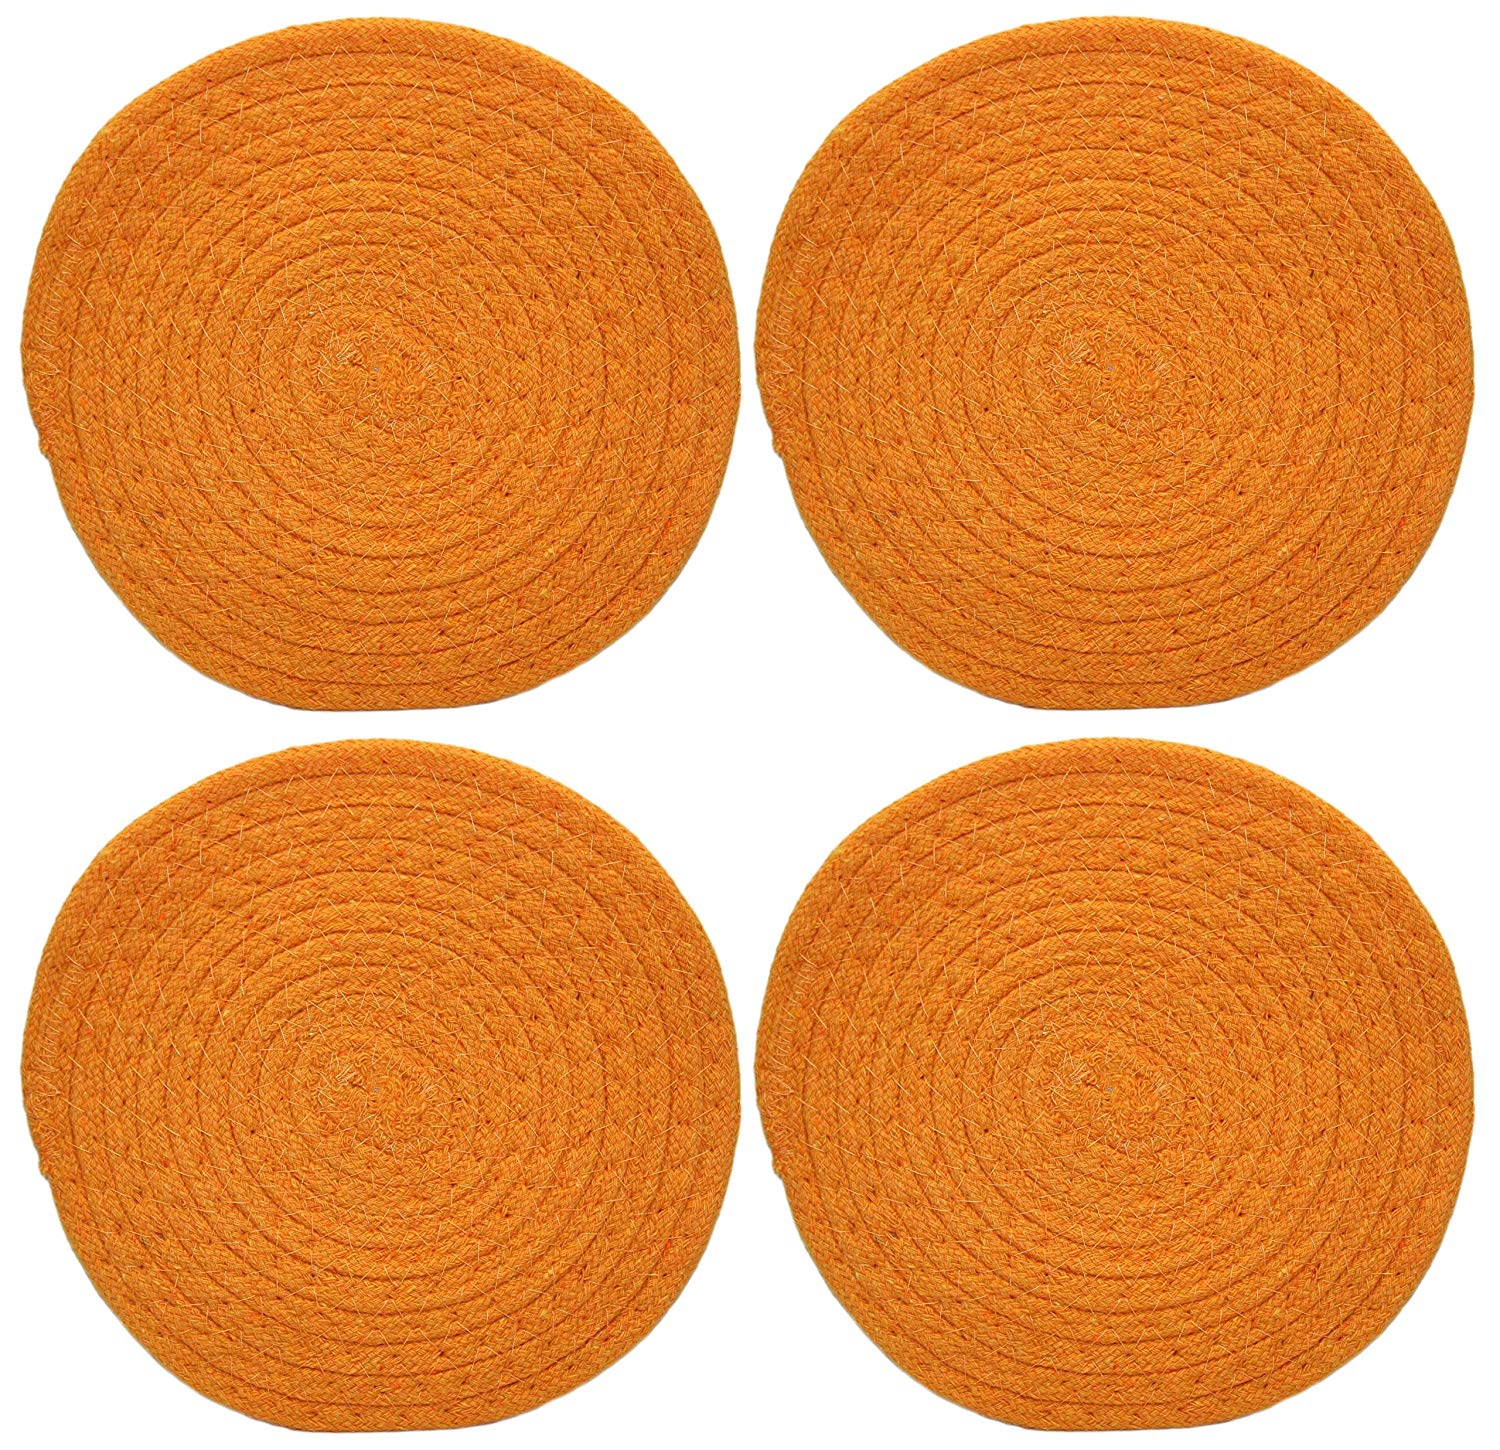 Set of 4 Black Duck Brand Woven Trivets! 8" Diameter - 4 Bright and Beautiful Colors - A Stylish Way to Protect Tables and Counter Tops From Heat and Moister! (4, Orange)